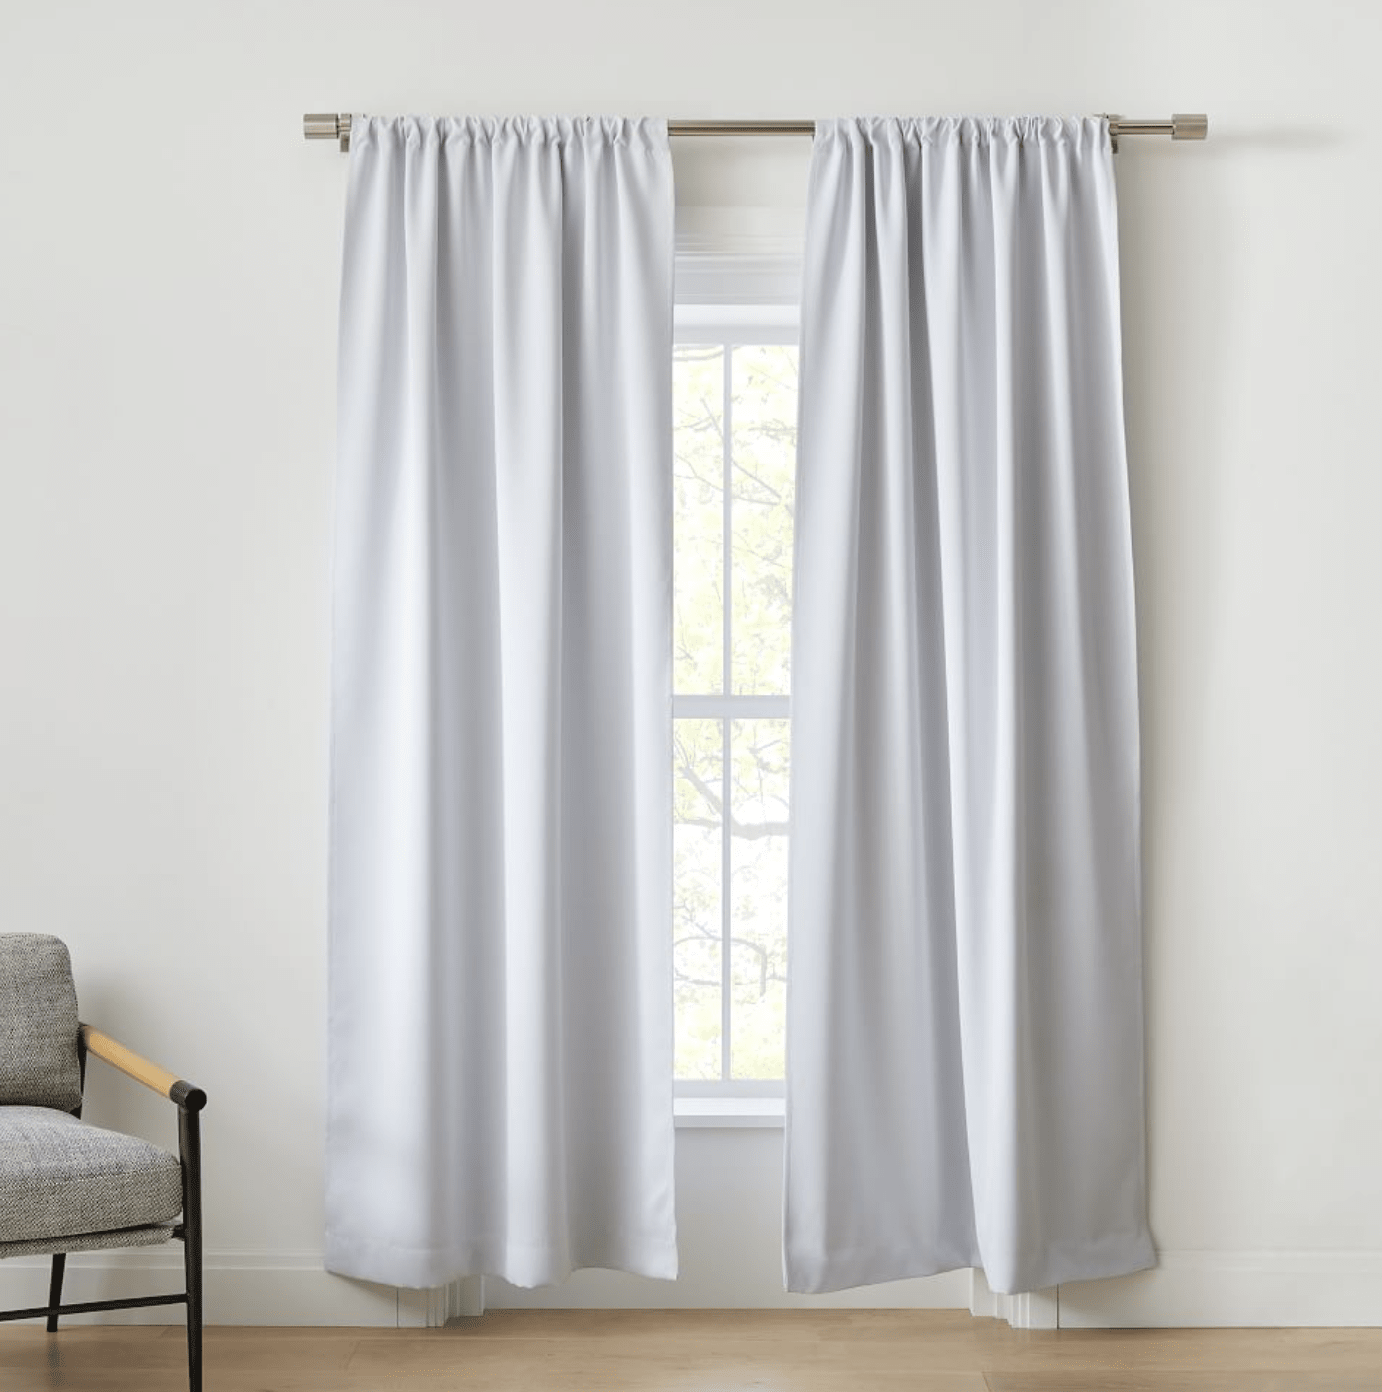 MHz quality and Washable Pleated Curtains White Different Sizes. 